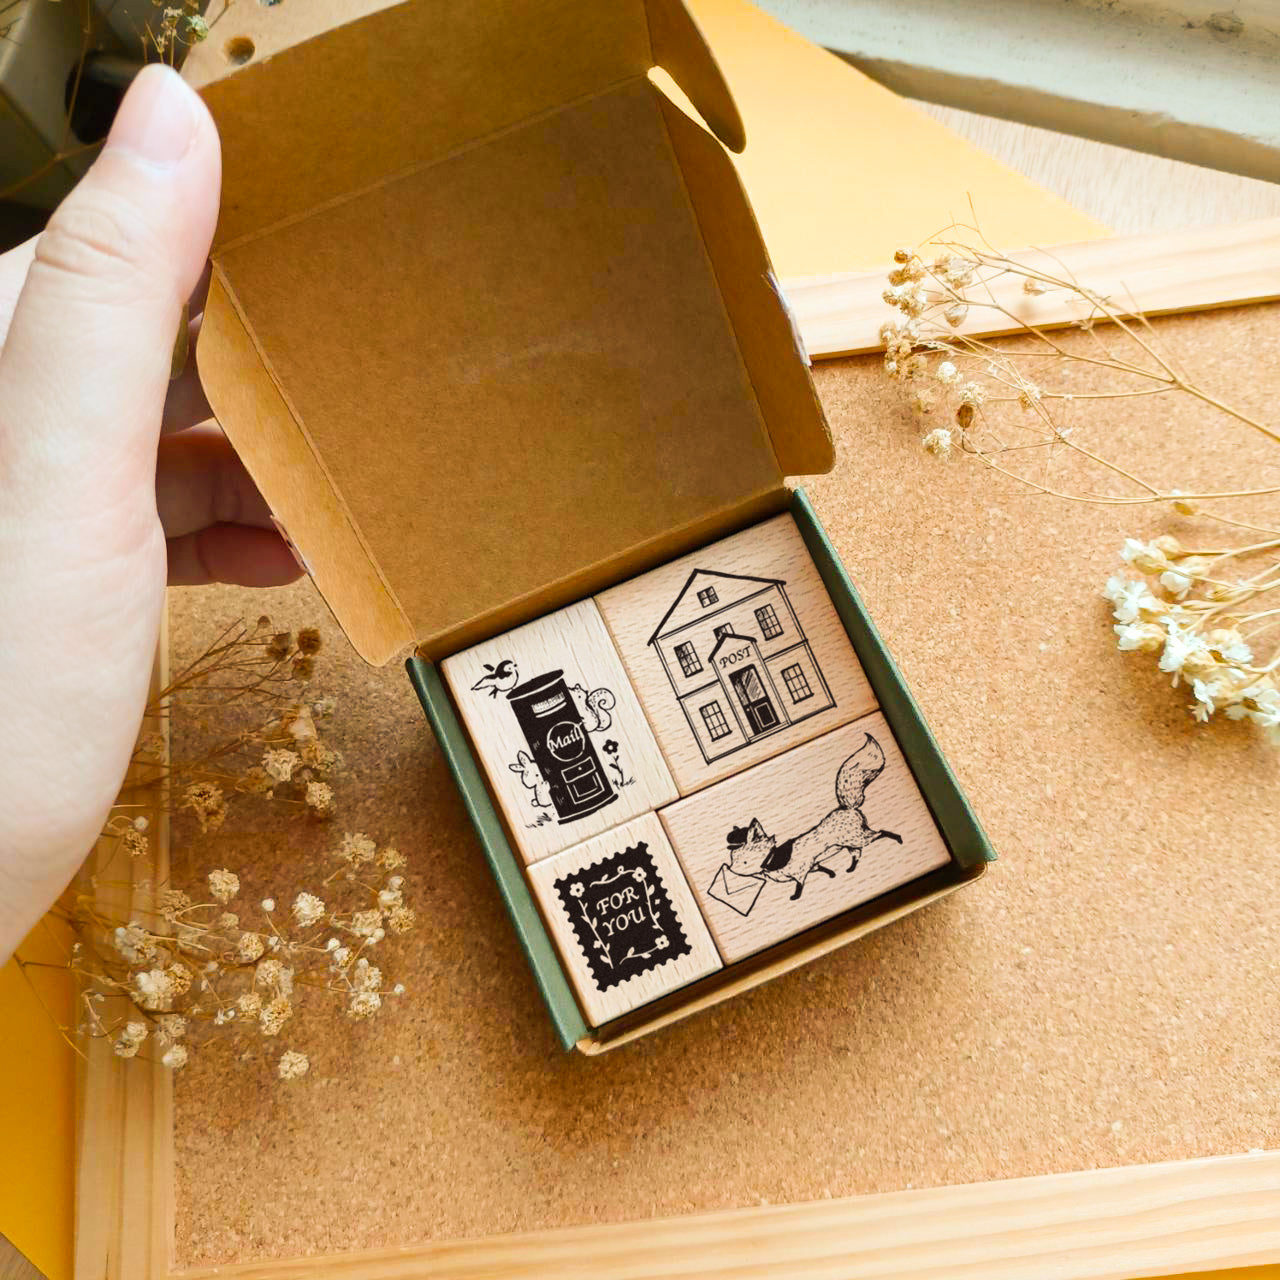 Micia Rubber Stamps Set: Forest Post Office